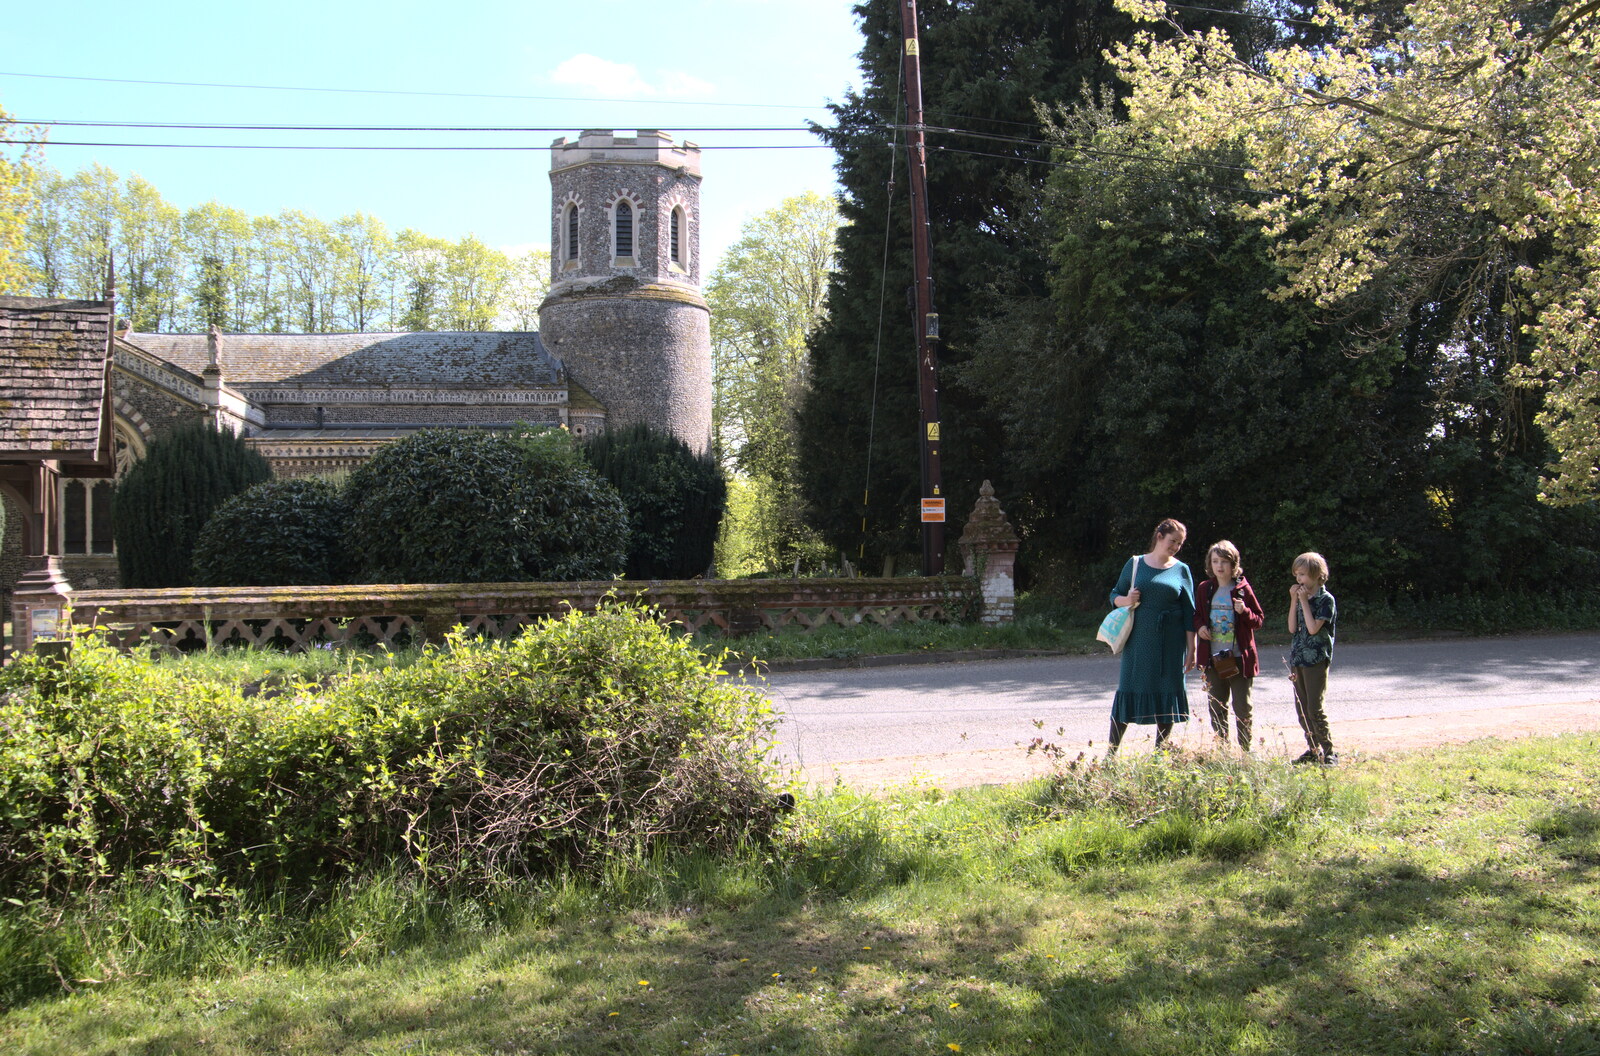 Hanging around outside St. Mary's, Brome from Lost Cat and a Walk on Nick's Lane, Brome, Suffolk - 26th April 2020